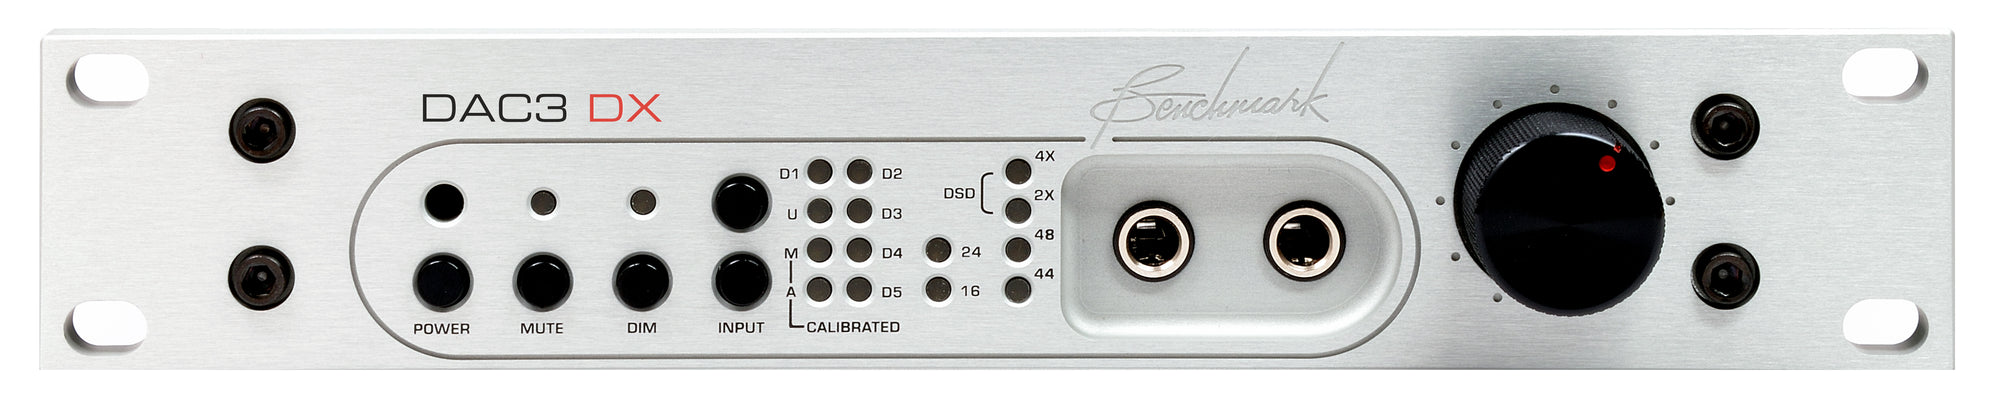 DAC3 DX Silver front panel